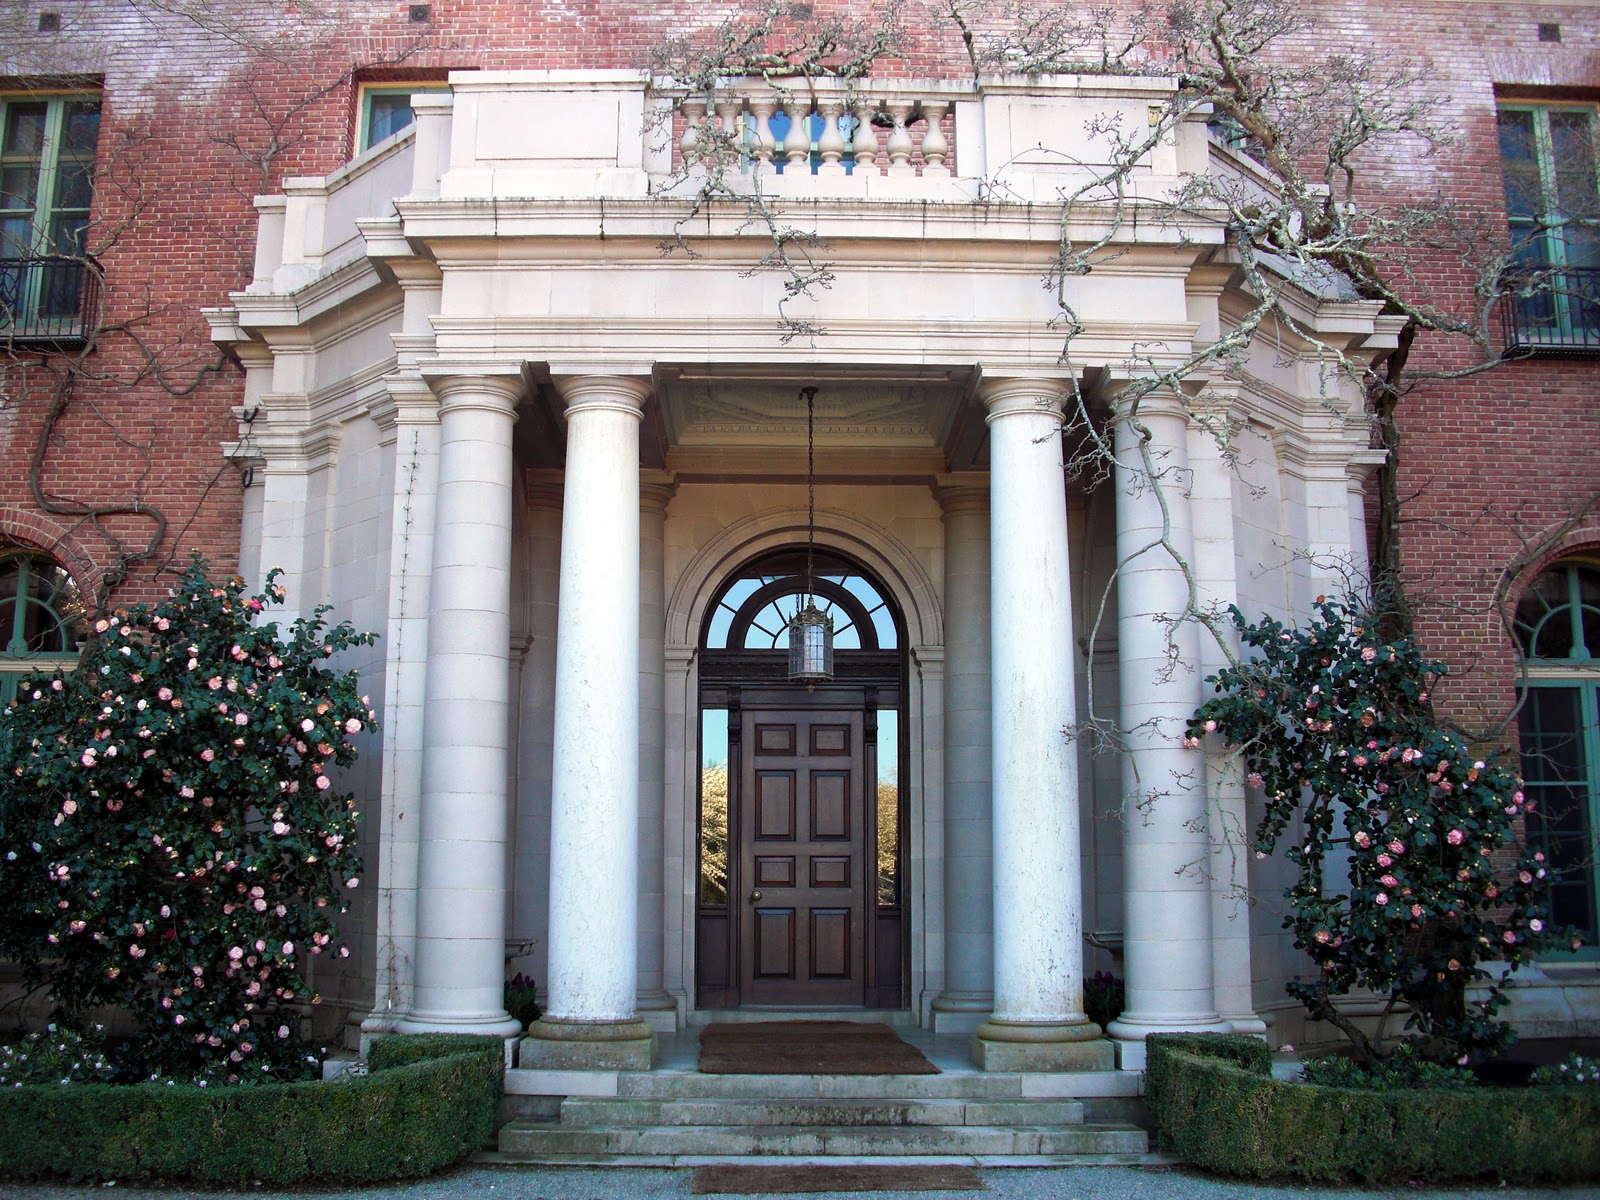 LBColby's DYNASTY Blog: Pix of the Day: FILOLI MANSION